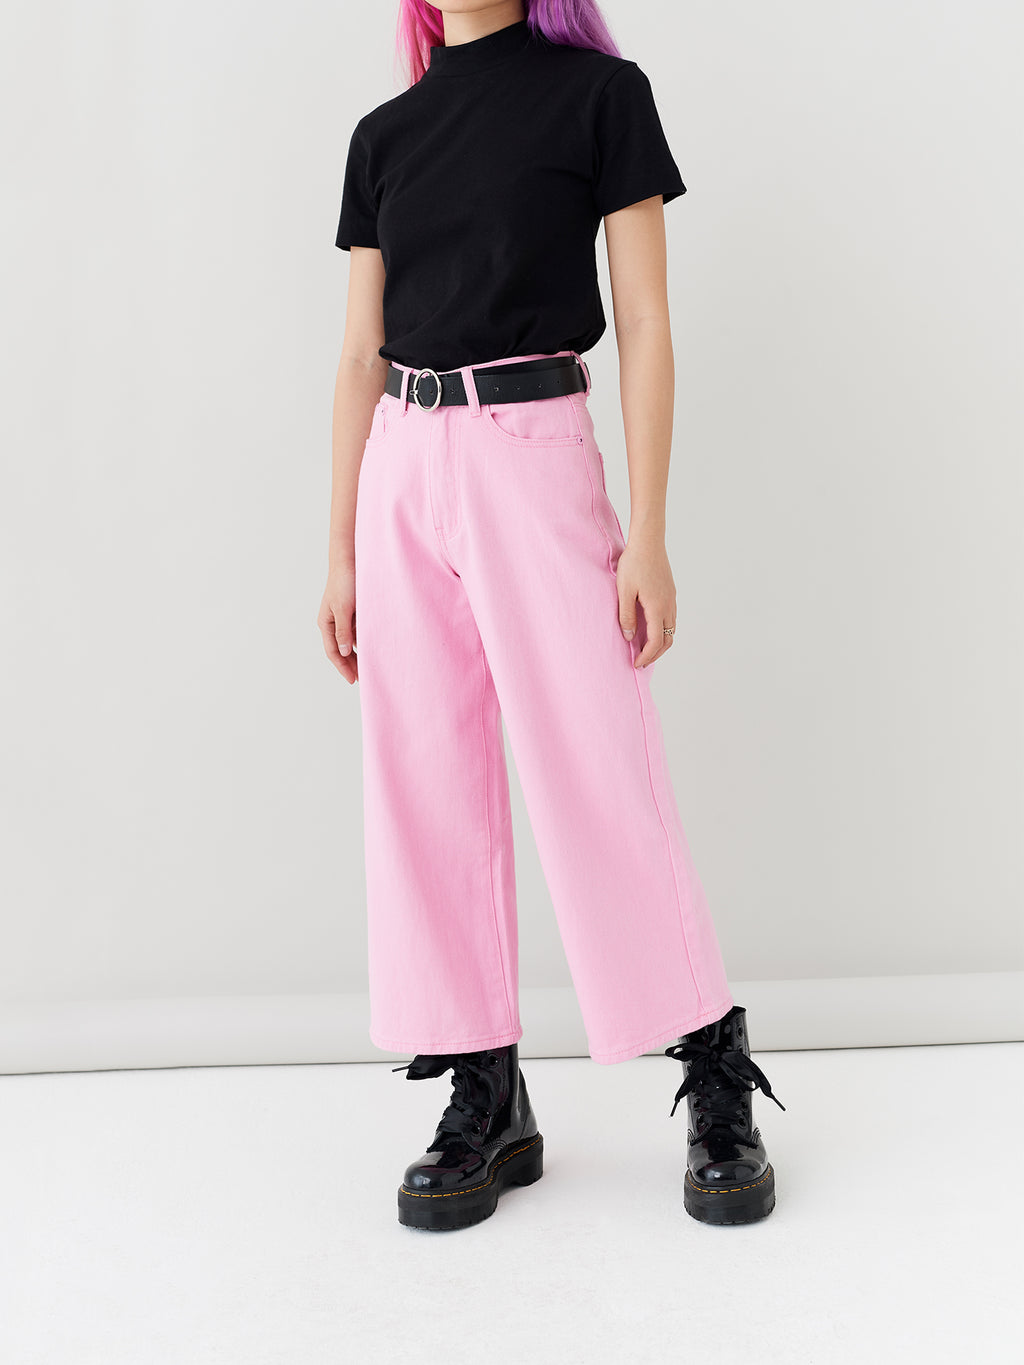 LO Cropped Wide Leg Jeans - Pink